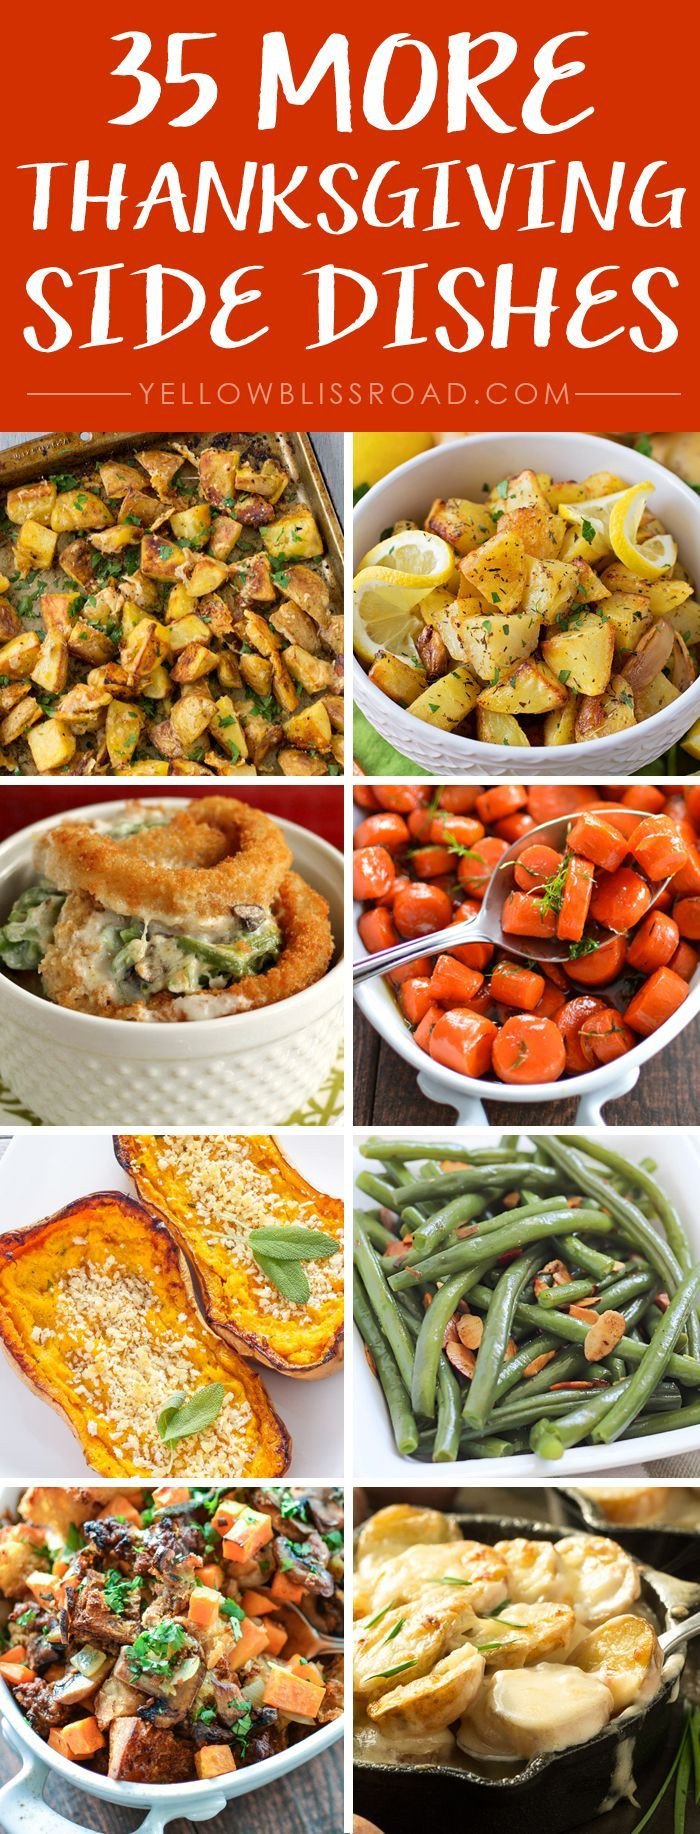 Christmas Dinner Sides
 17 Best images about Thanksgiving ideas on Pinterest